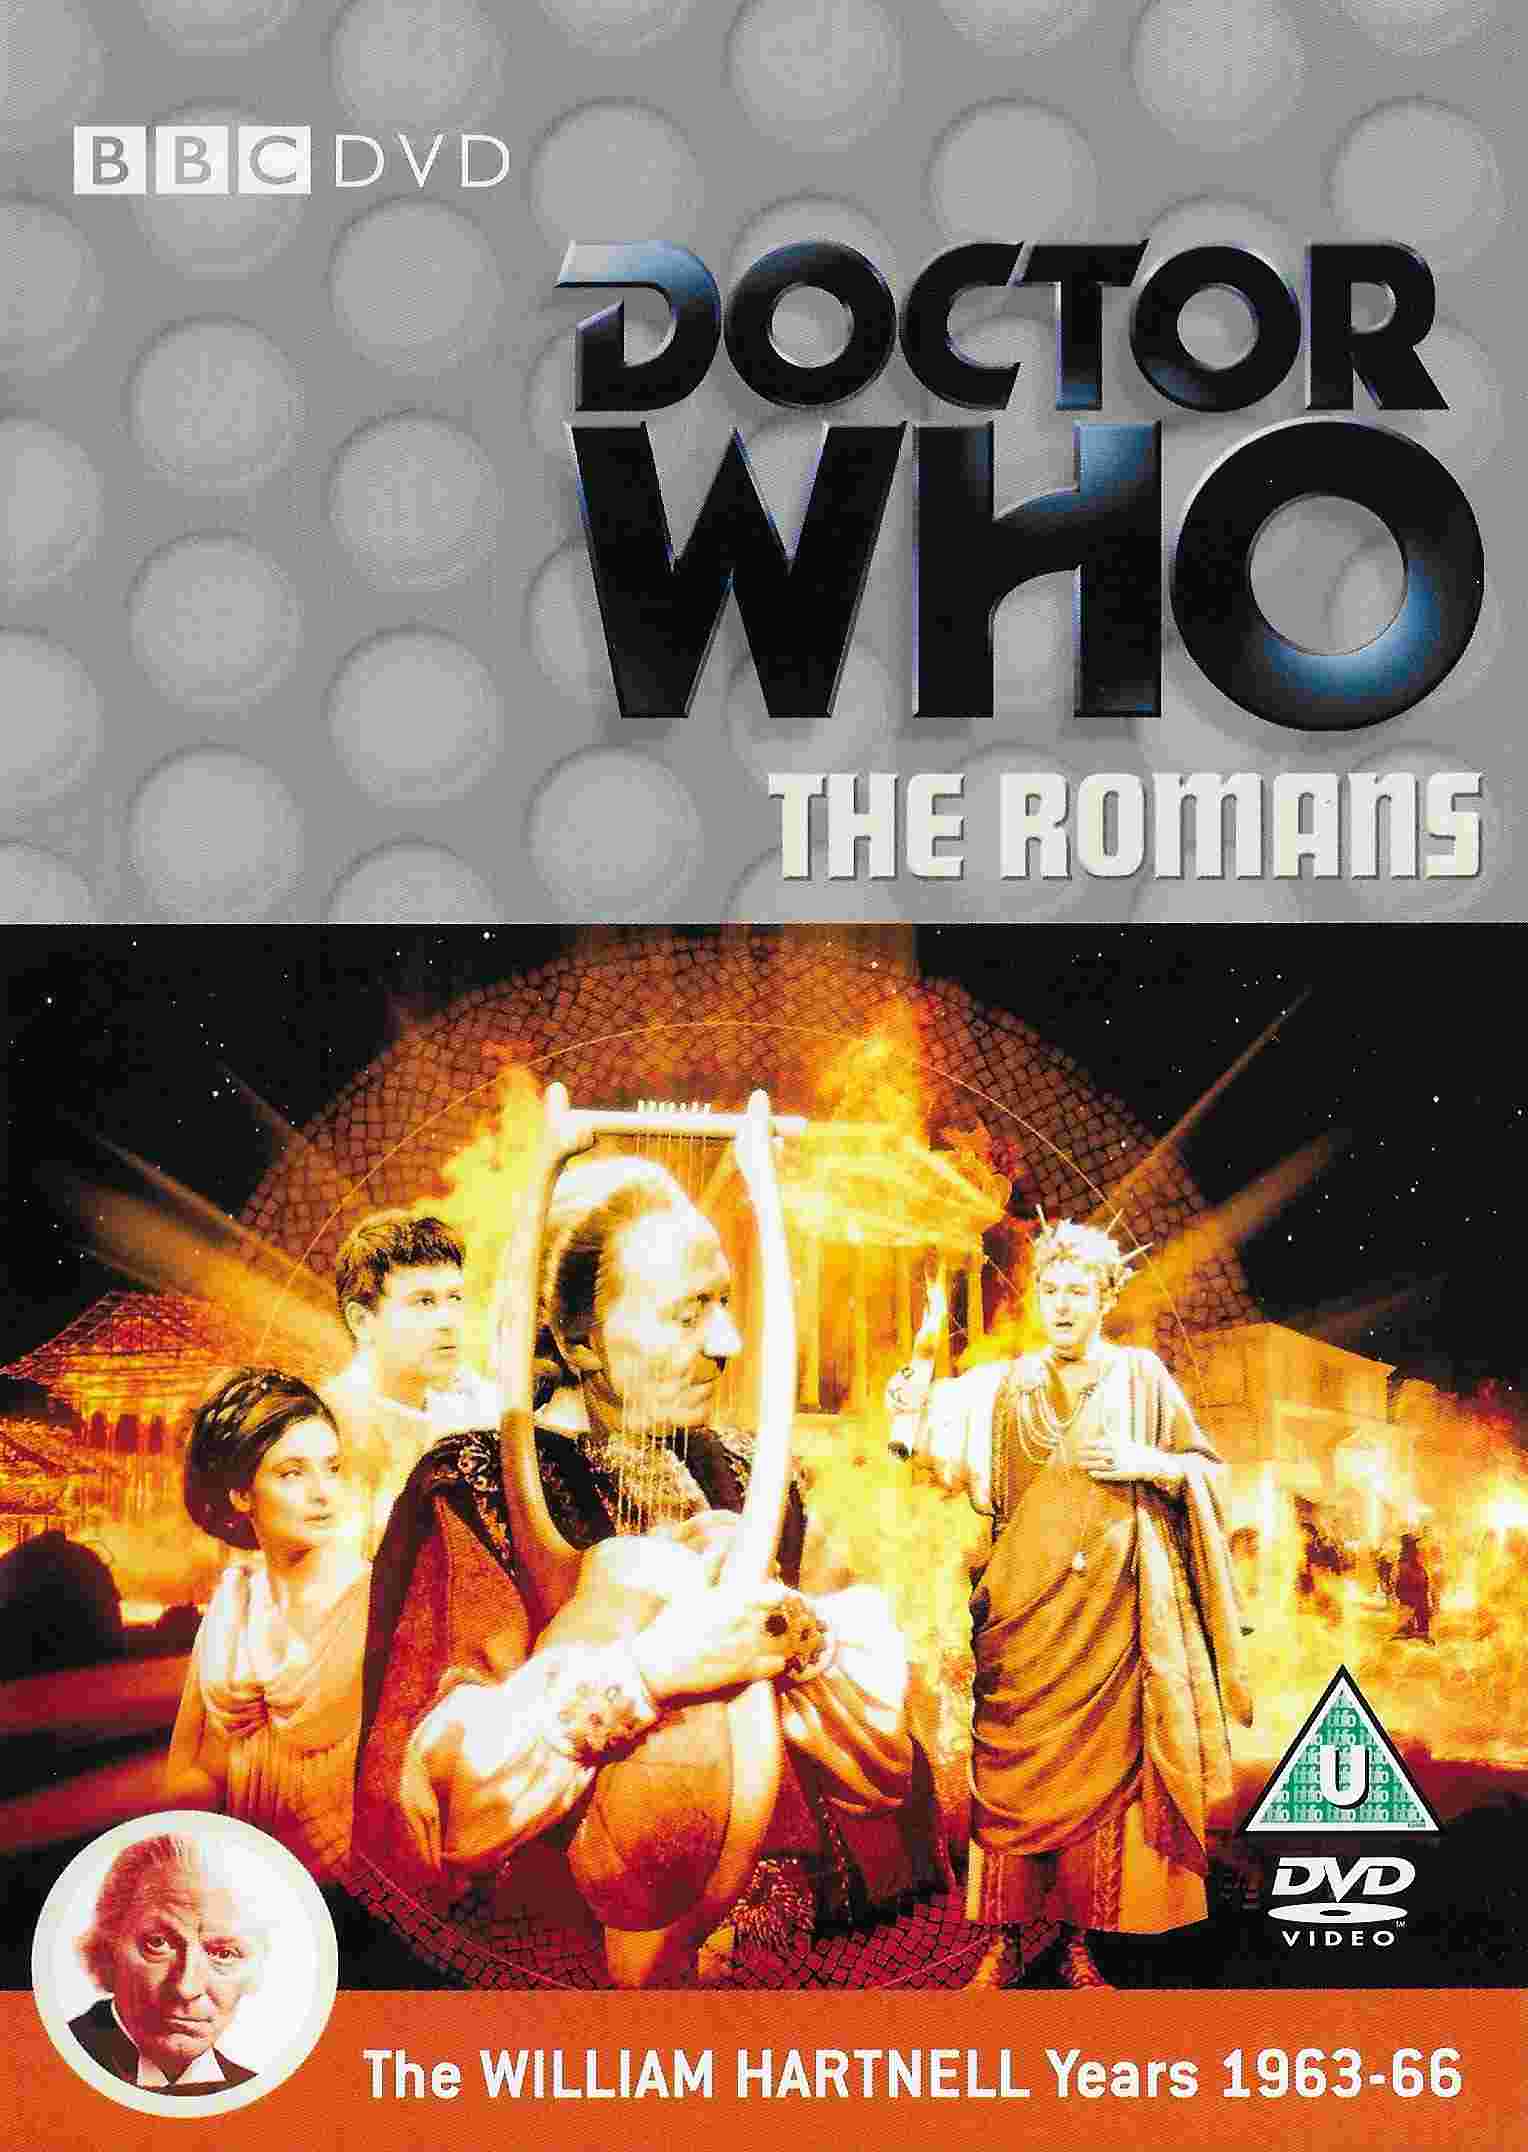 Picture of BBCDVD 2971 Doctor Who - The Romans by artist Dennis Spooner from the BBC dvds - Records and Tapes library